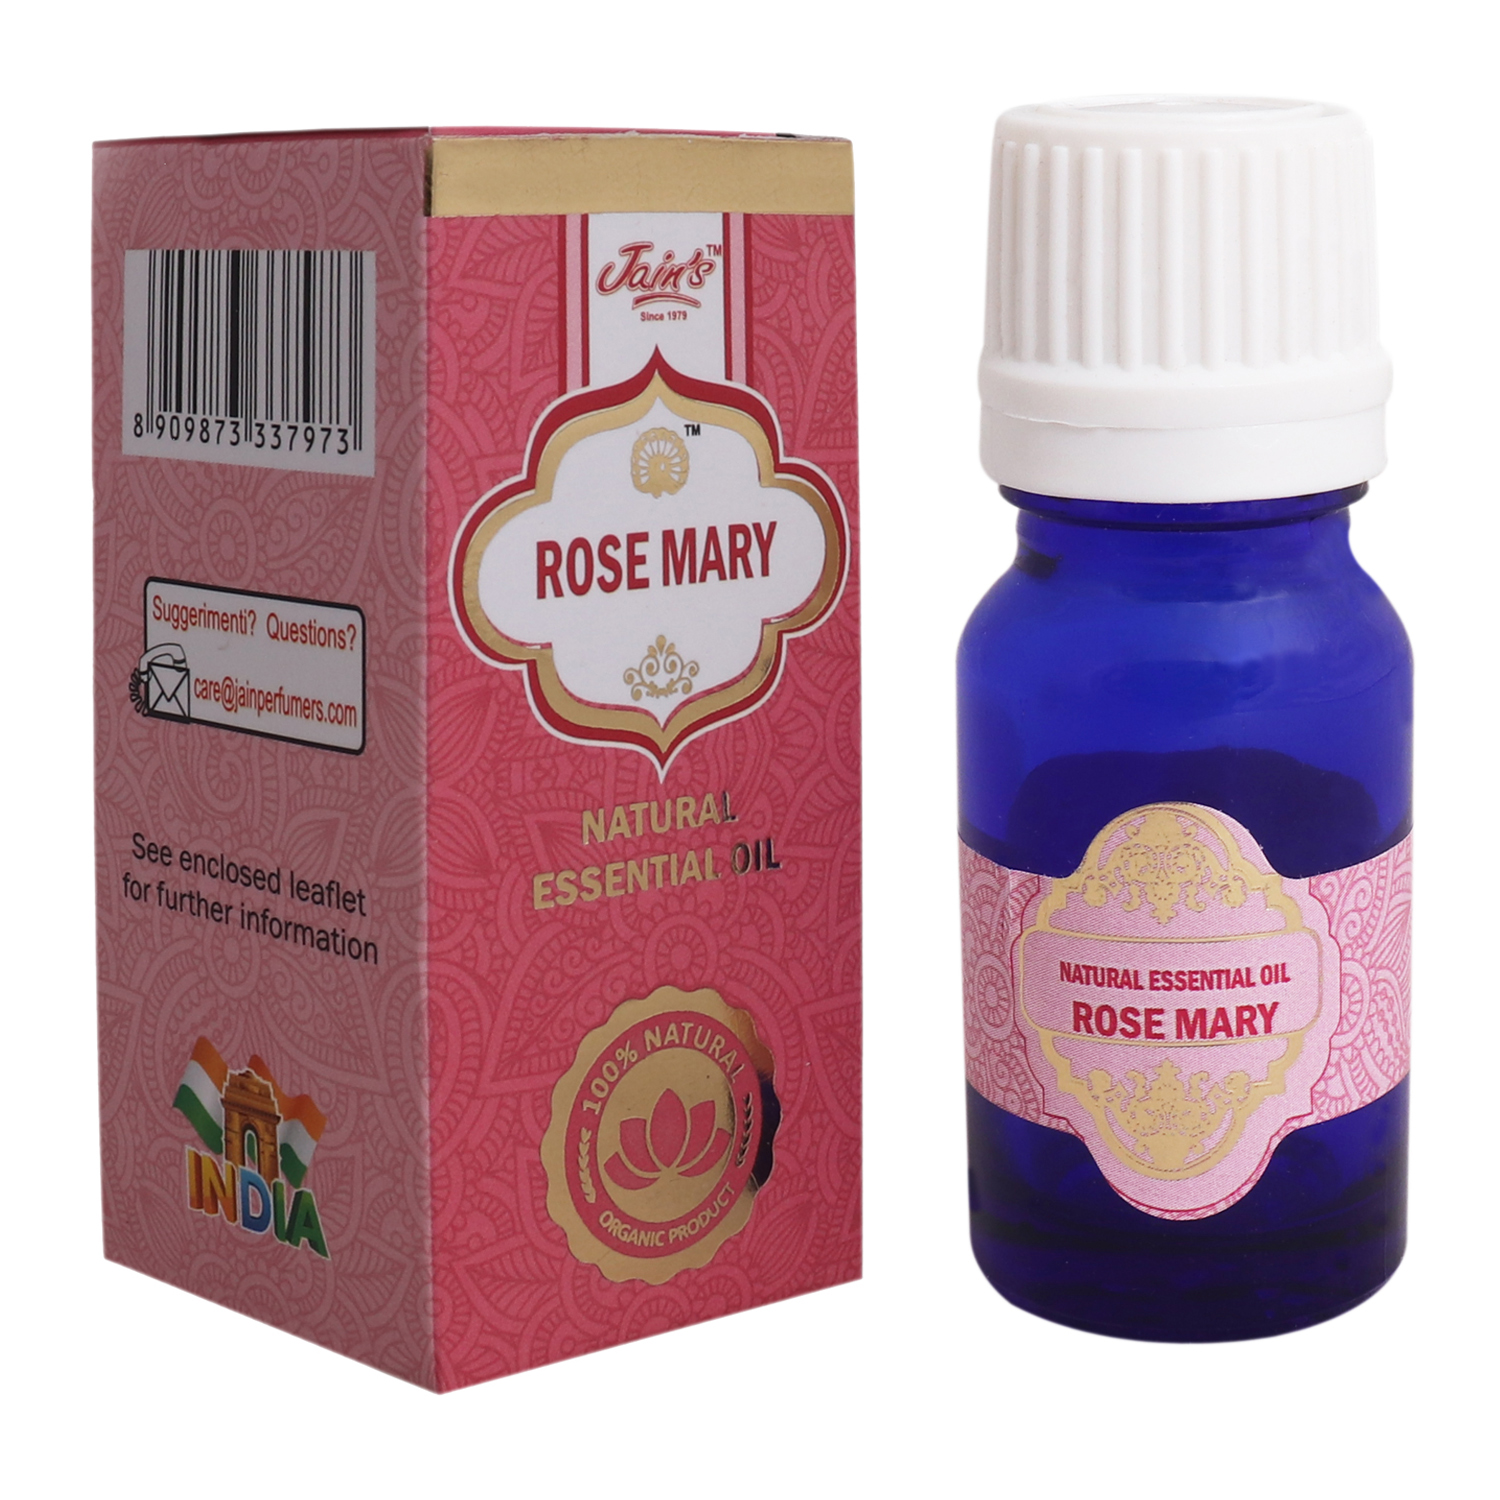 ROSE MARY ESSENTIAL OIL